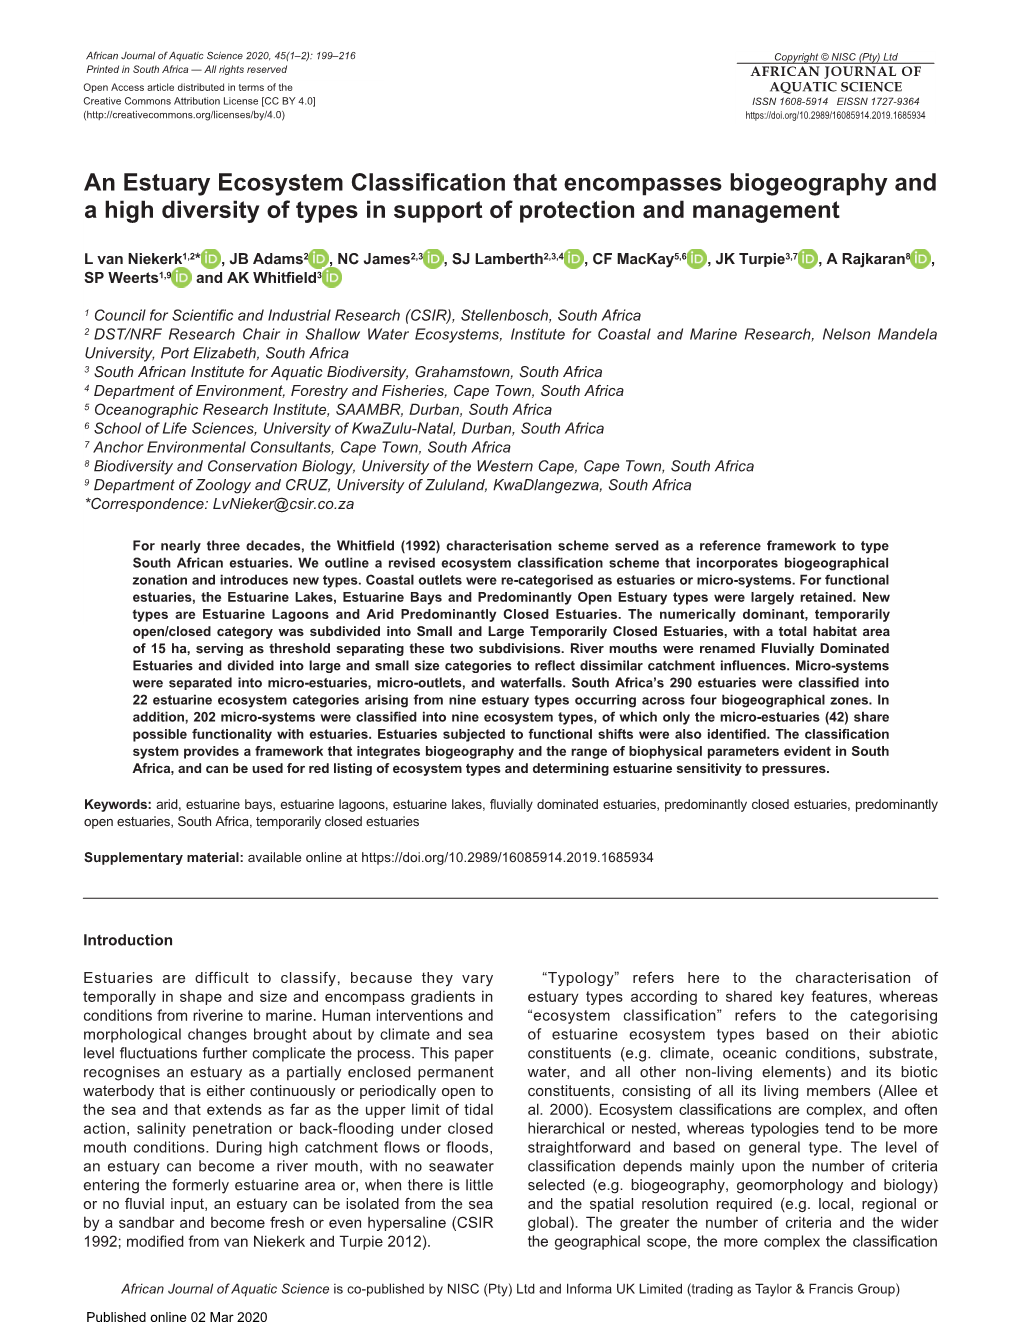 An Estuary Ecosystem Classification That Encompasses Biogeography and a High Diversity of Types in Support of Protection and Management